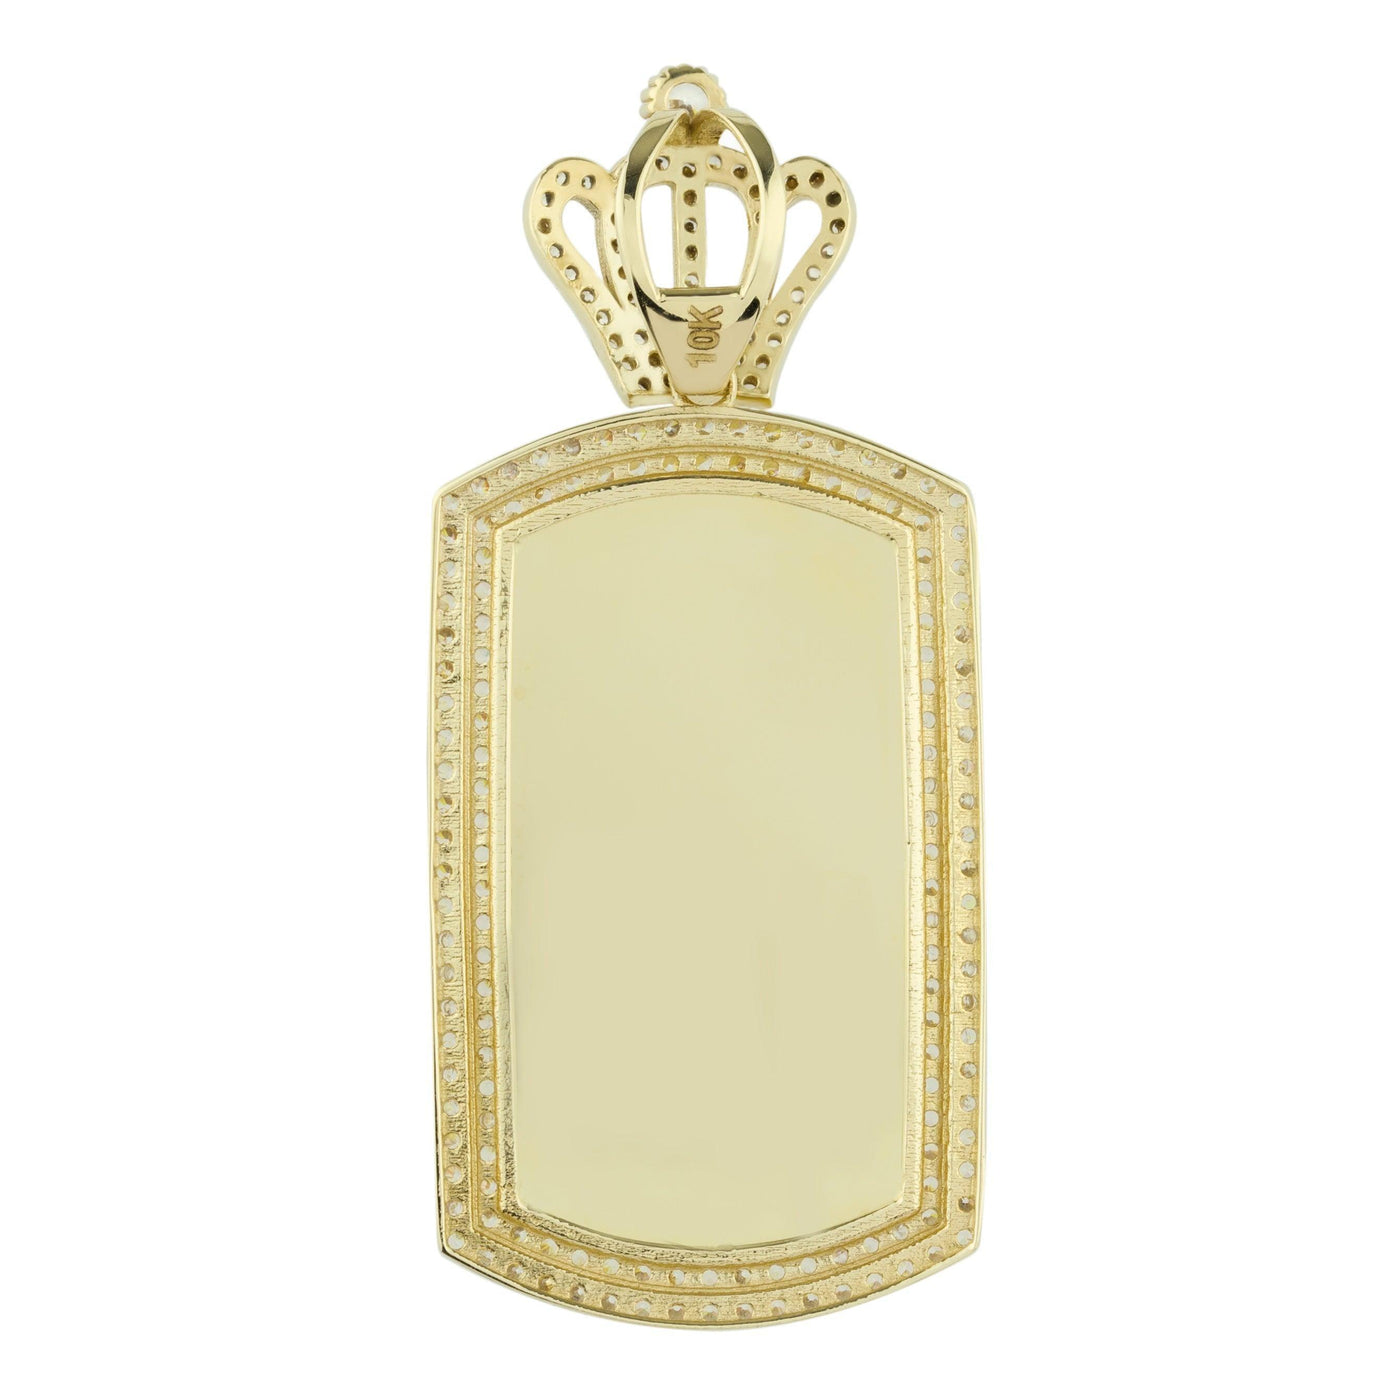 2" Crown Dog Tag Medallion Picture Memory CZ Pendant 10K Yellow Gold - bayamjewelry